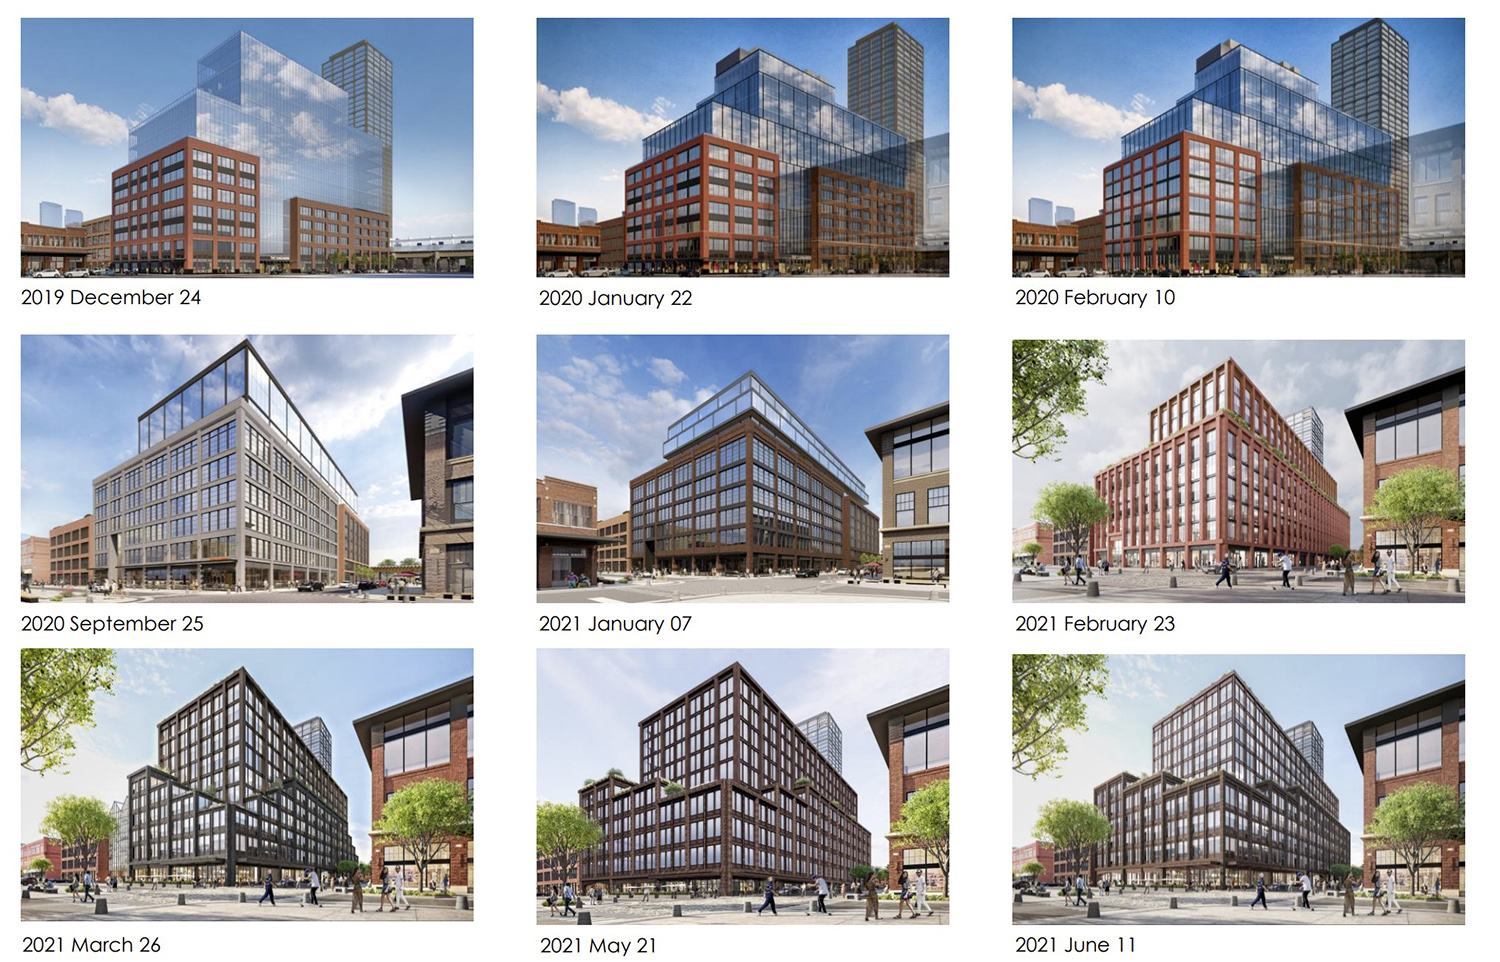 History of Design Revisions for 917 W Fulton Market. Renderings by Morris Adjmi Architects